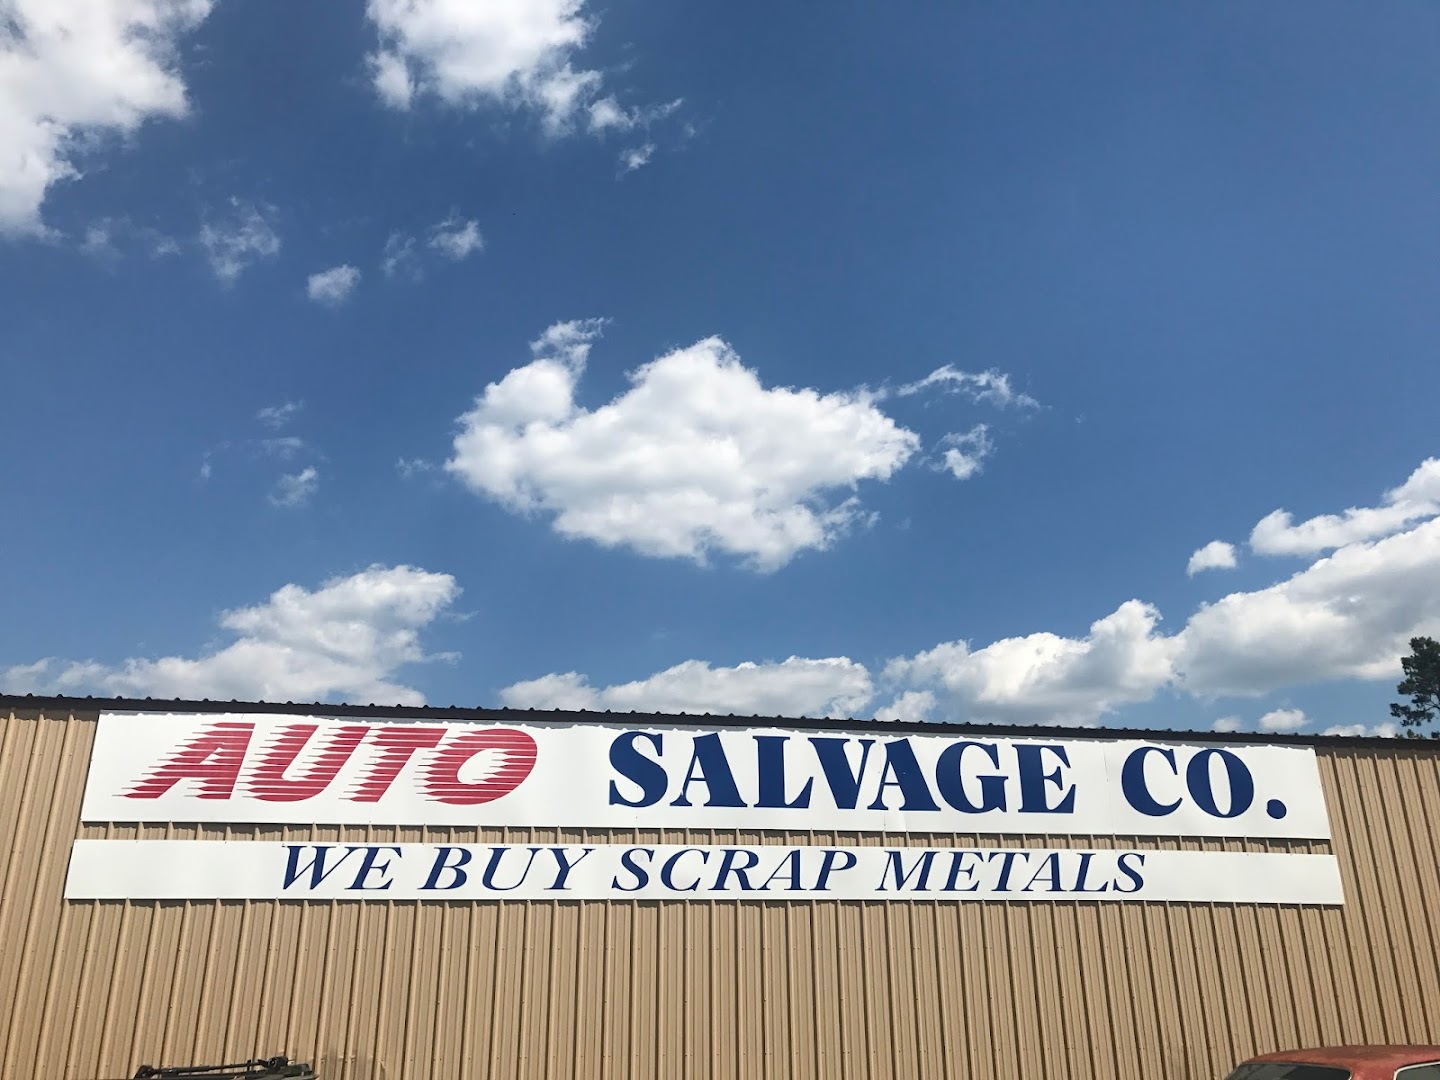 Used auto parts store In Ladson SC 